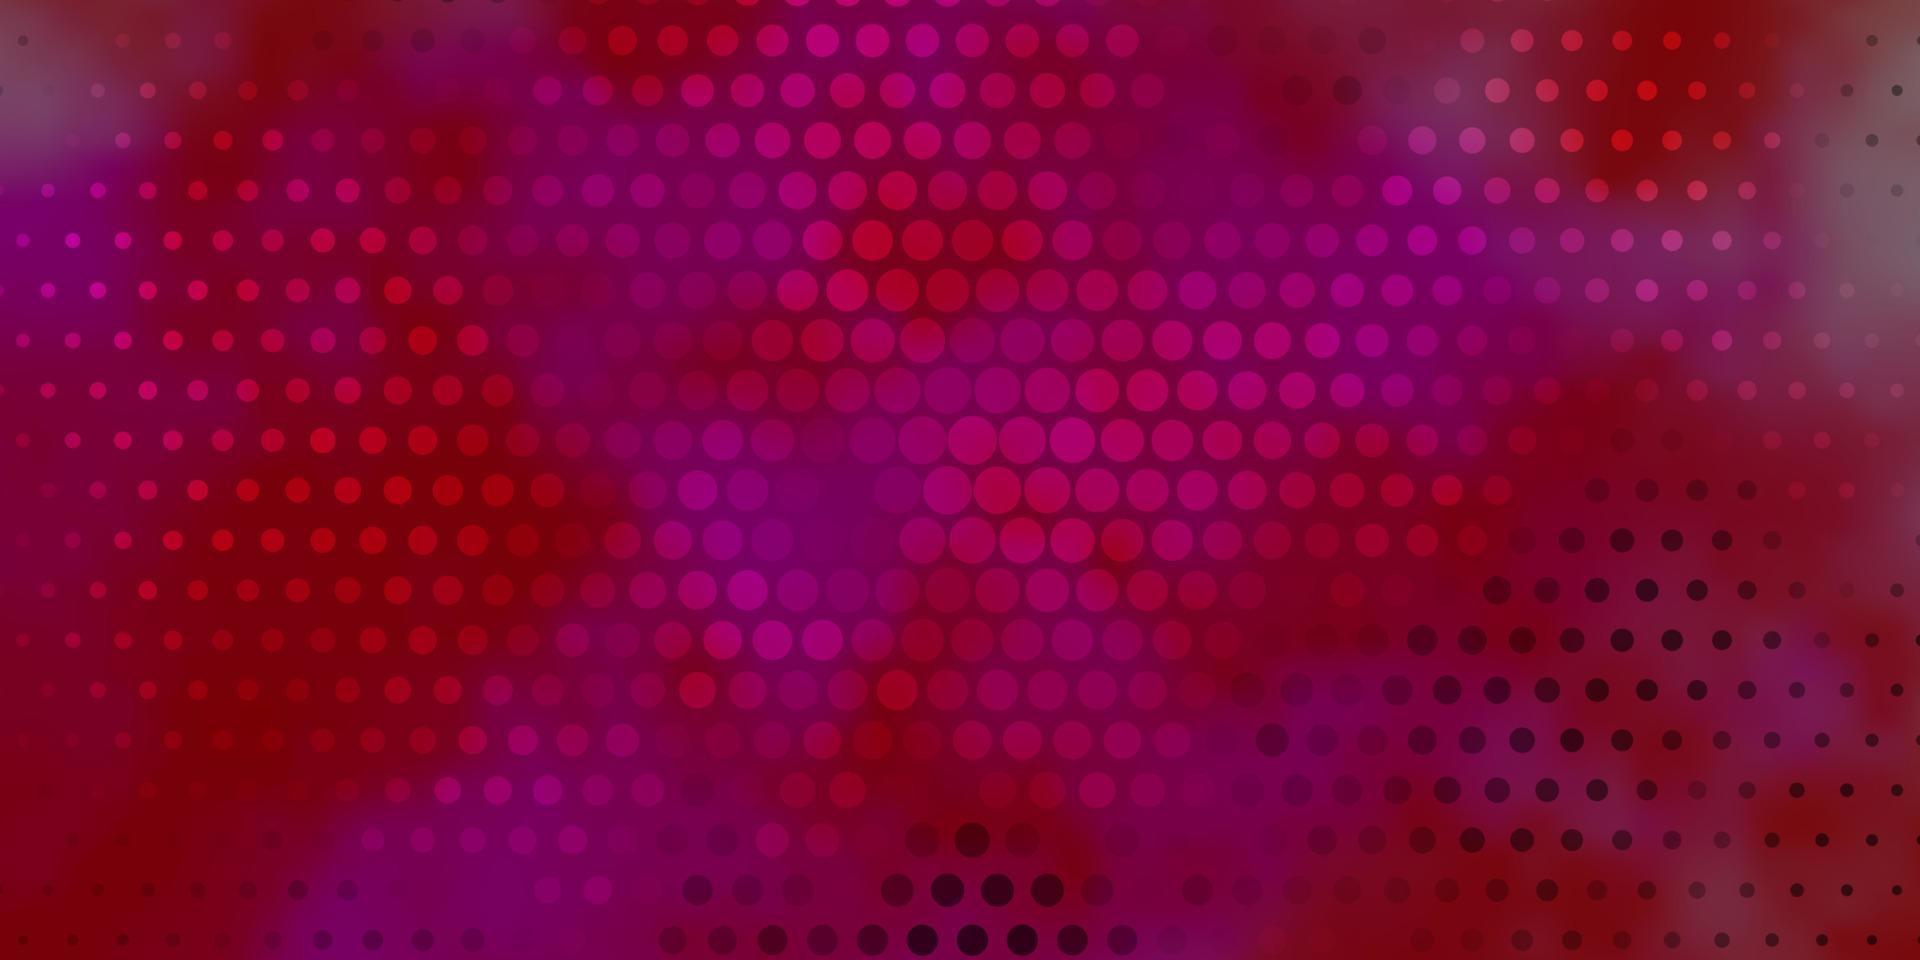 Dark Pink vector background with circles.